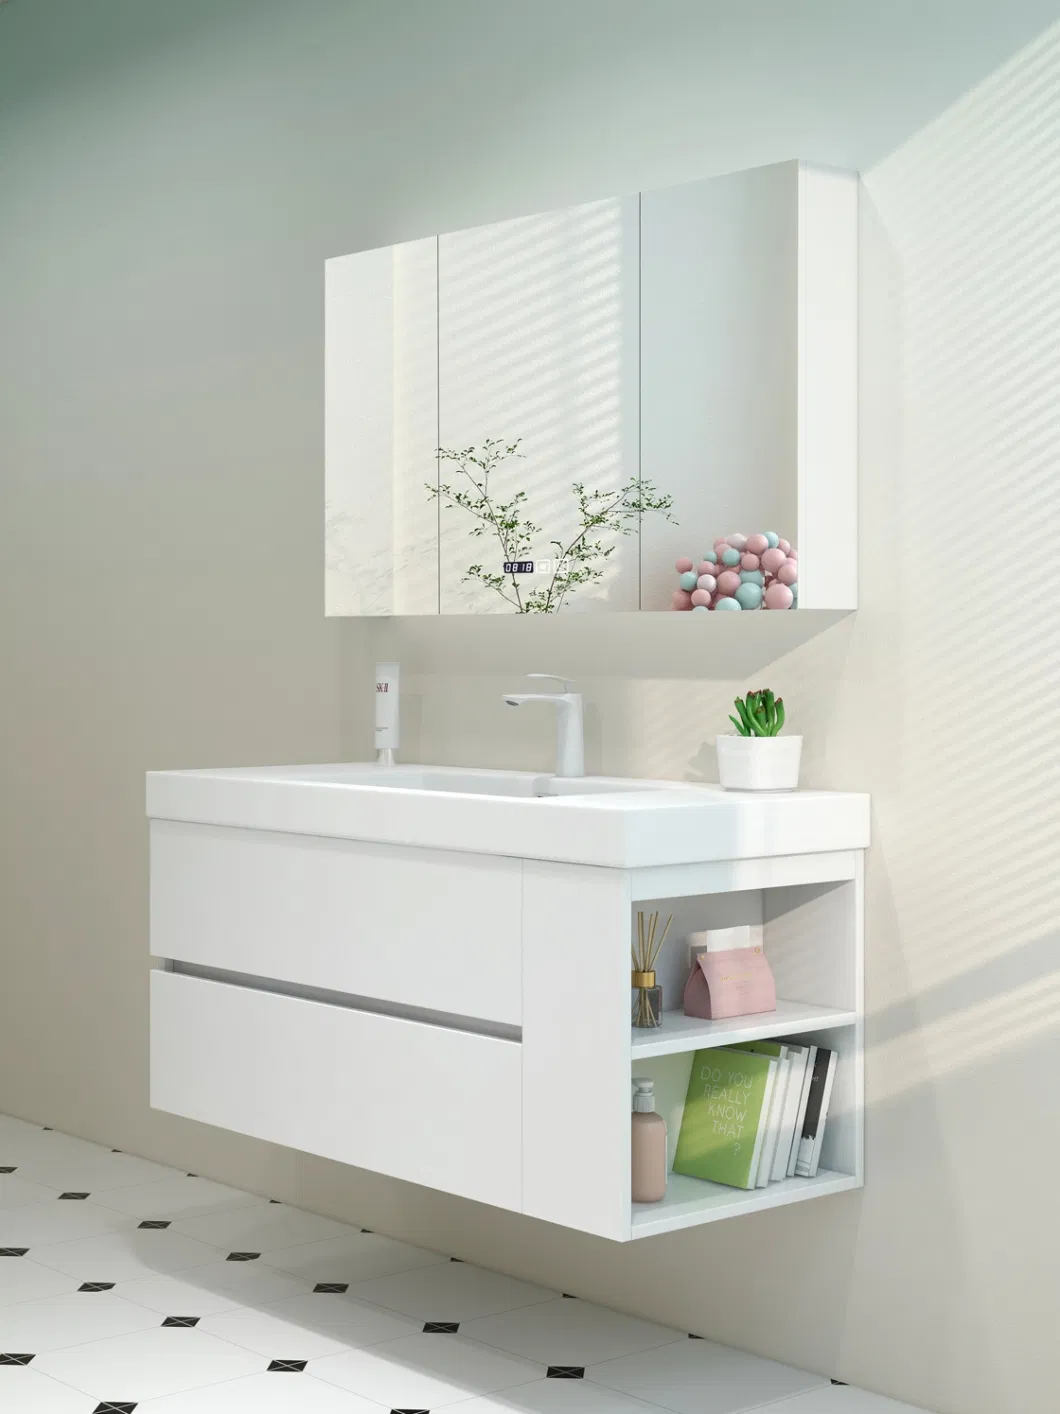 White Italian Style Light Luxury Solid Wood Bathroom Cabinet with Mirror